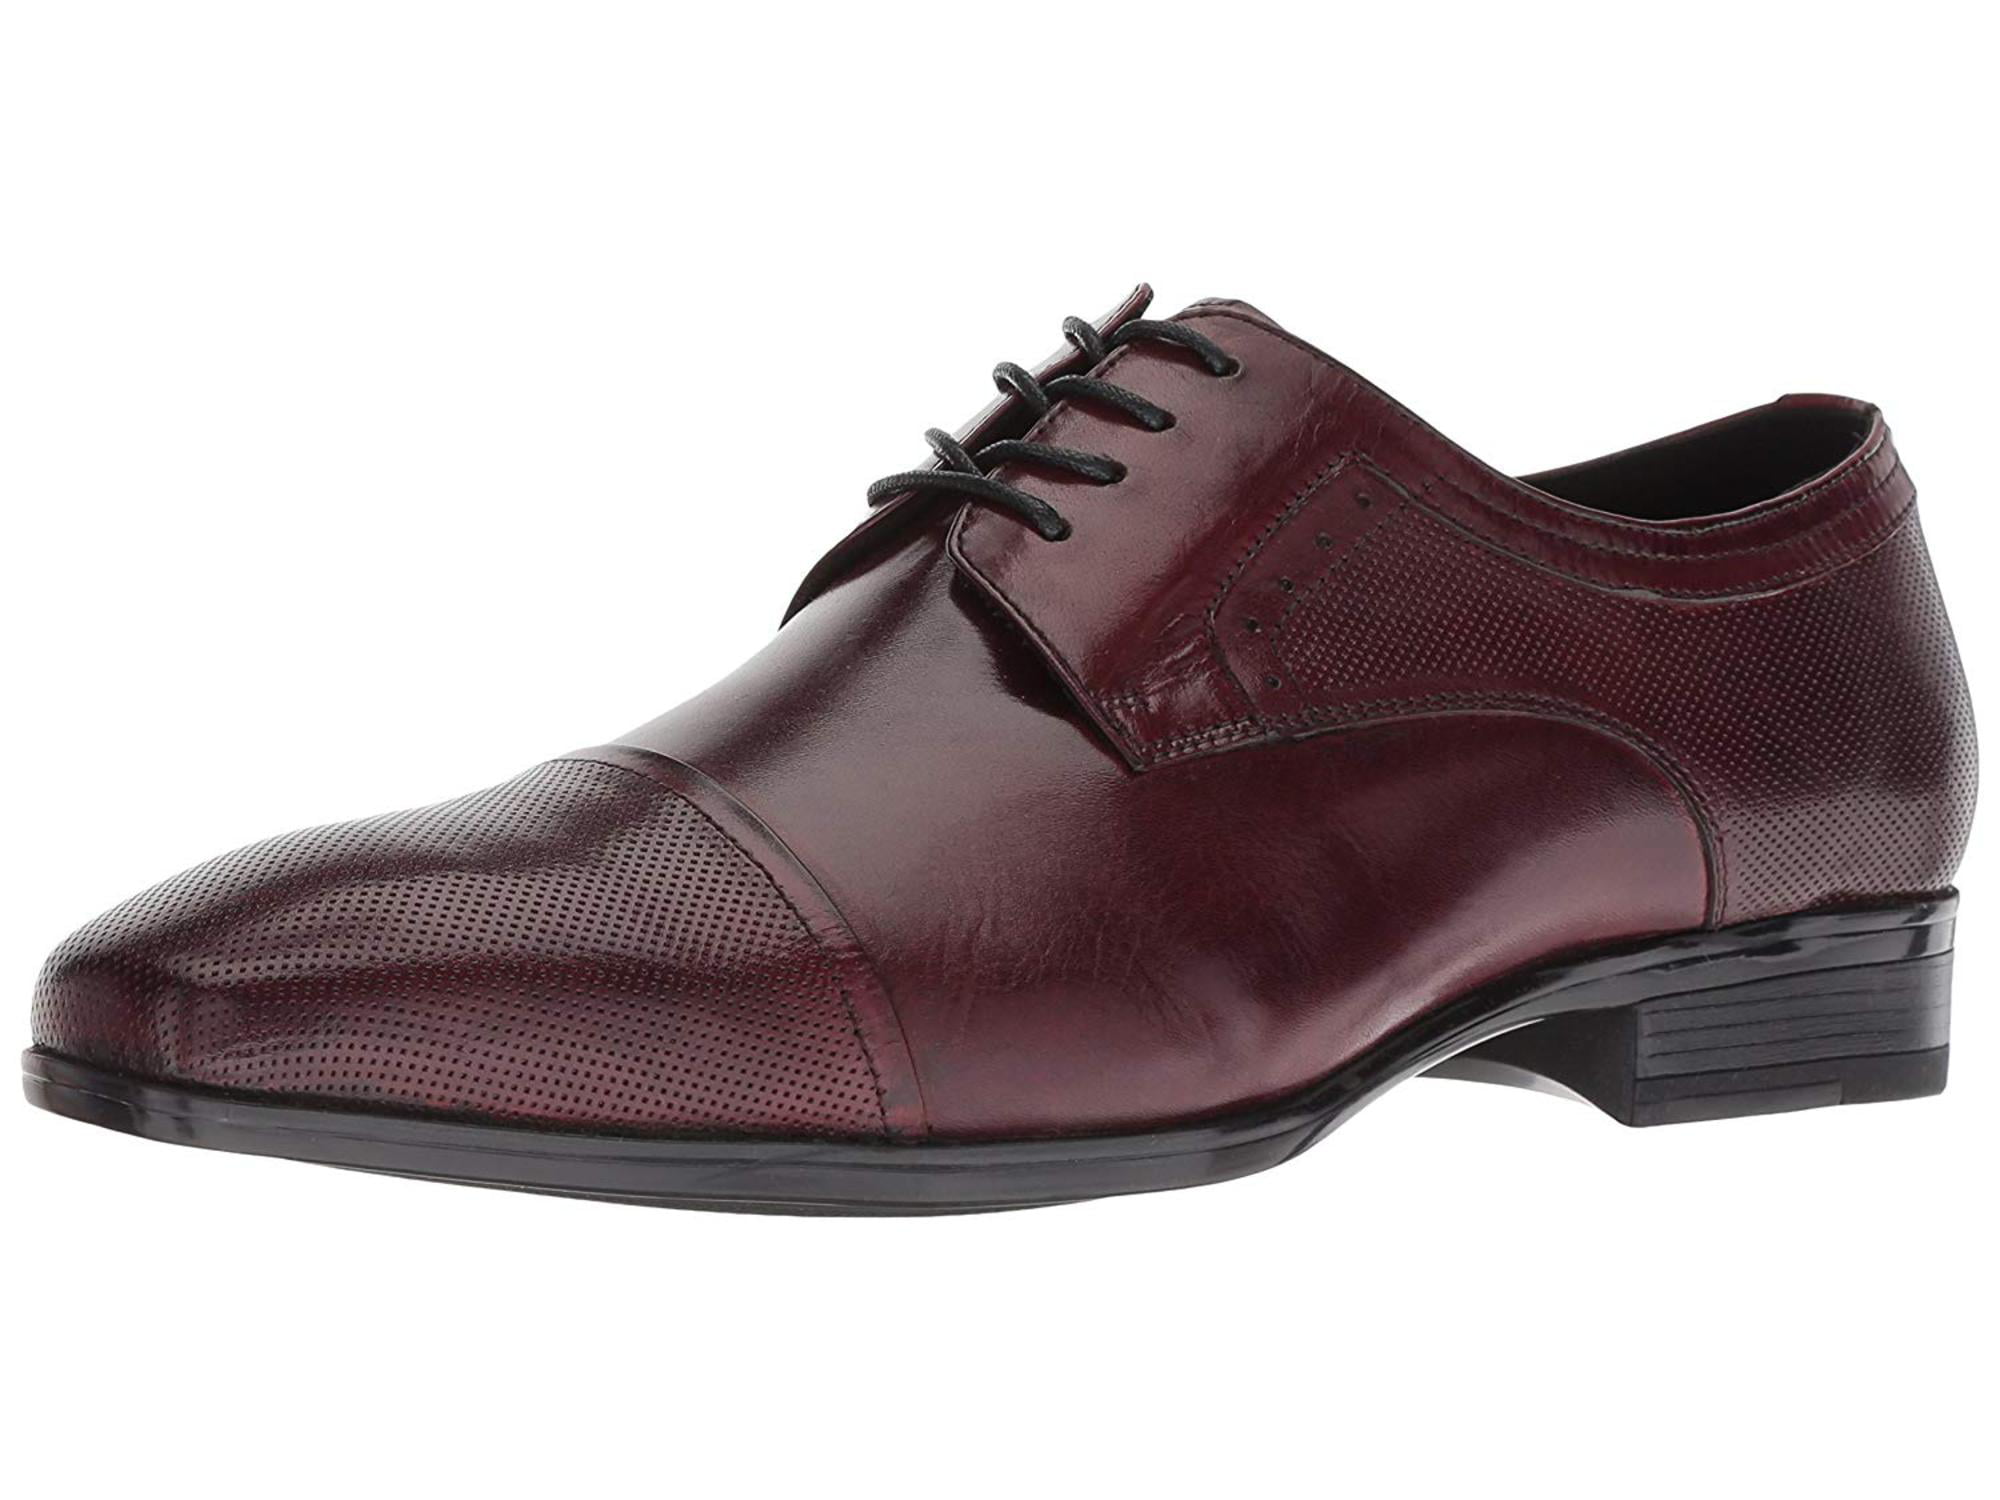 Kenneth Cole New York Men's Oliver LACE UP Oxford, Bordeaux, 12 M US ...